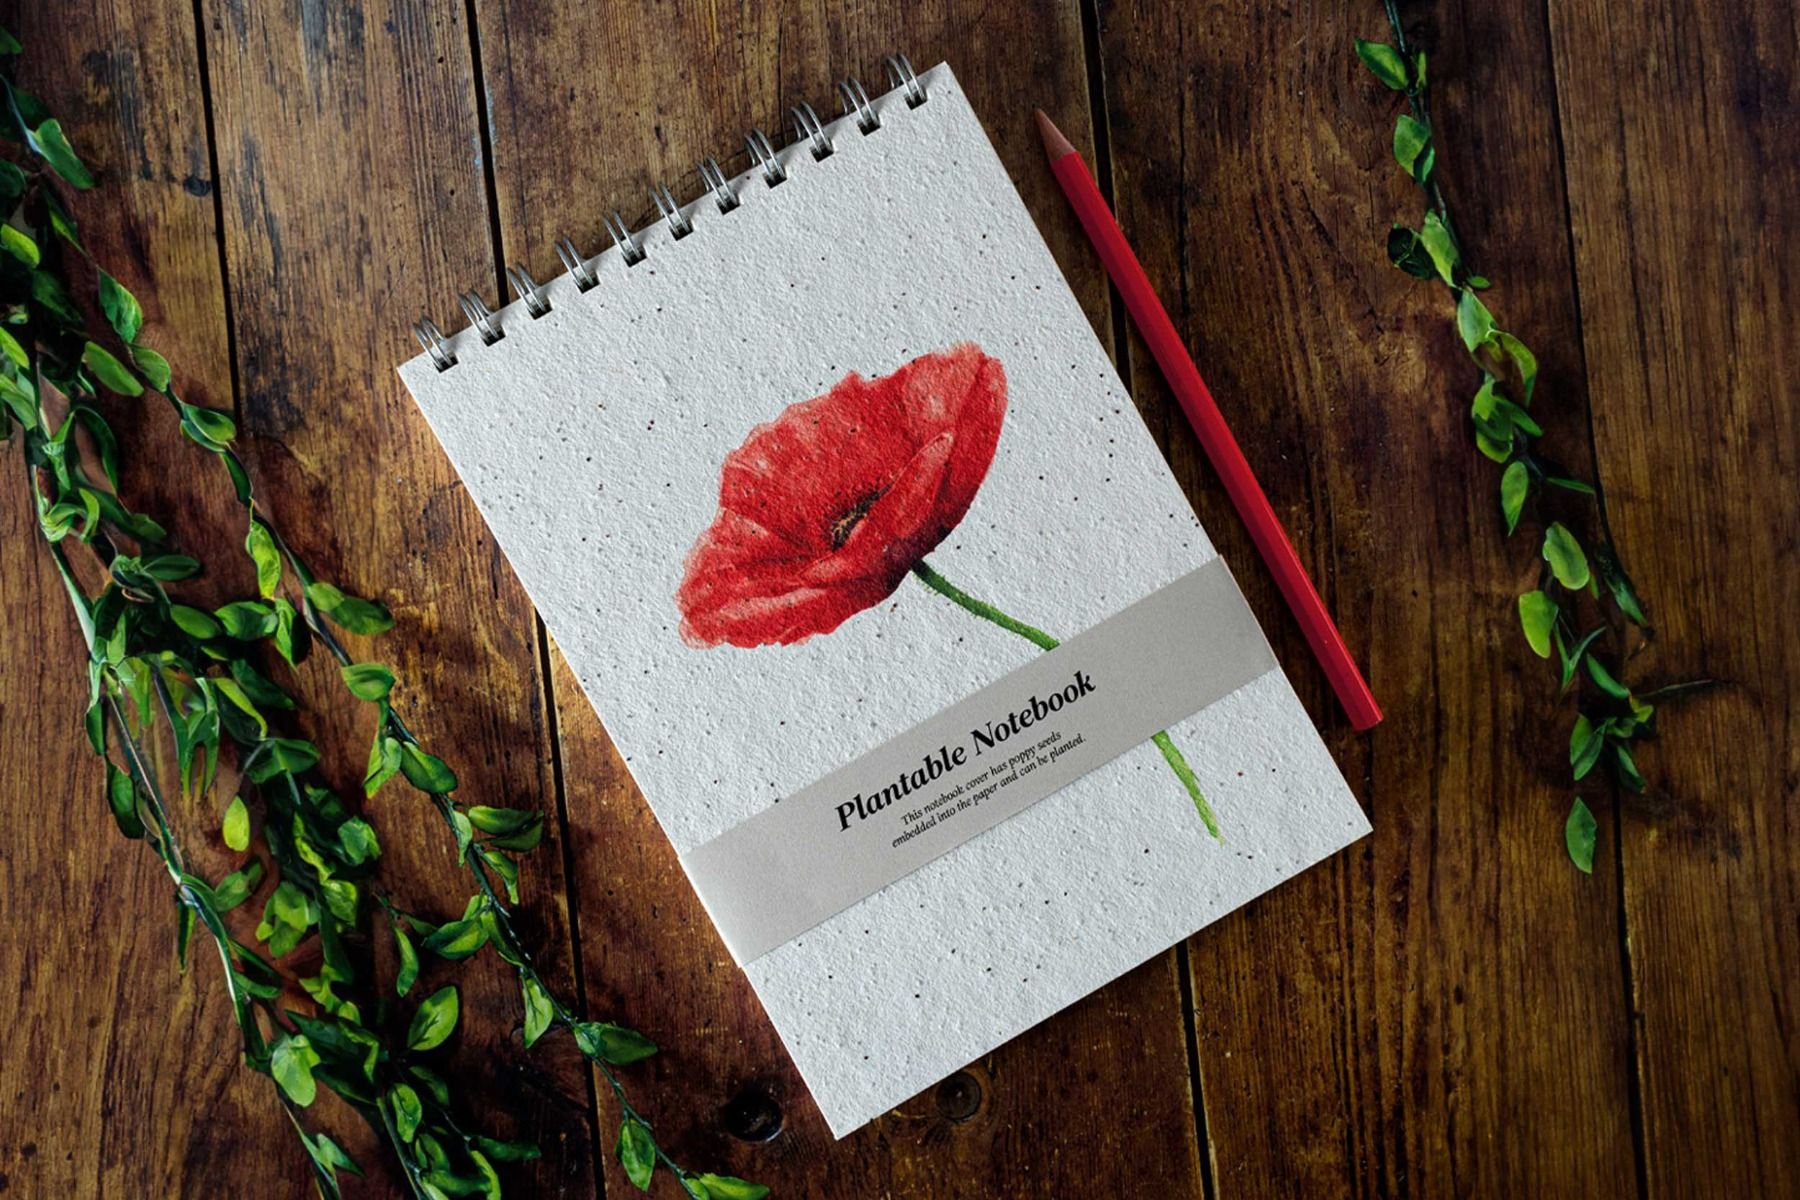 poppy flower plantable notebook with poppy seeds